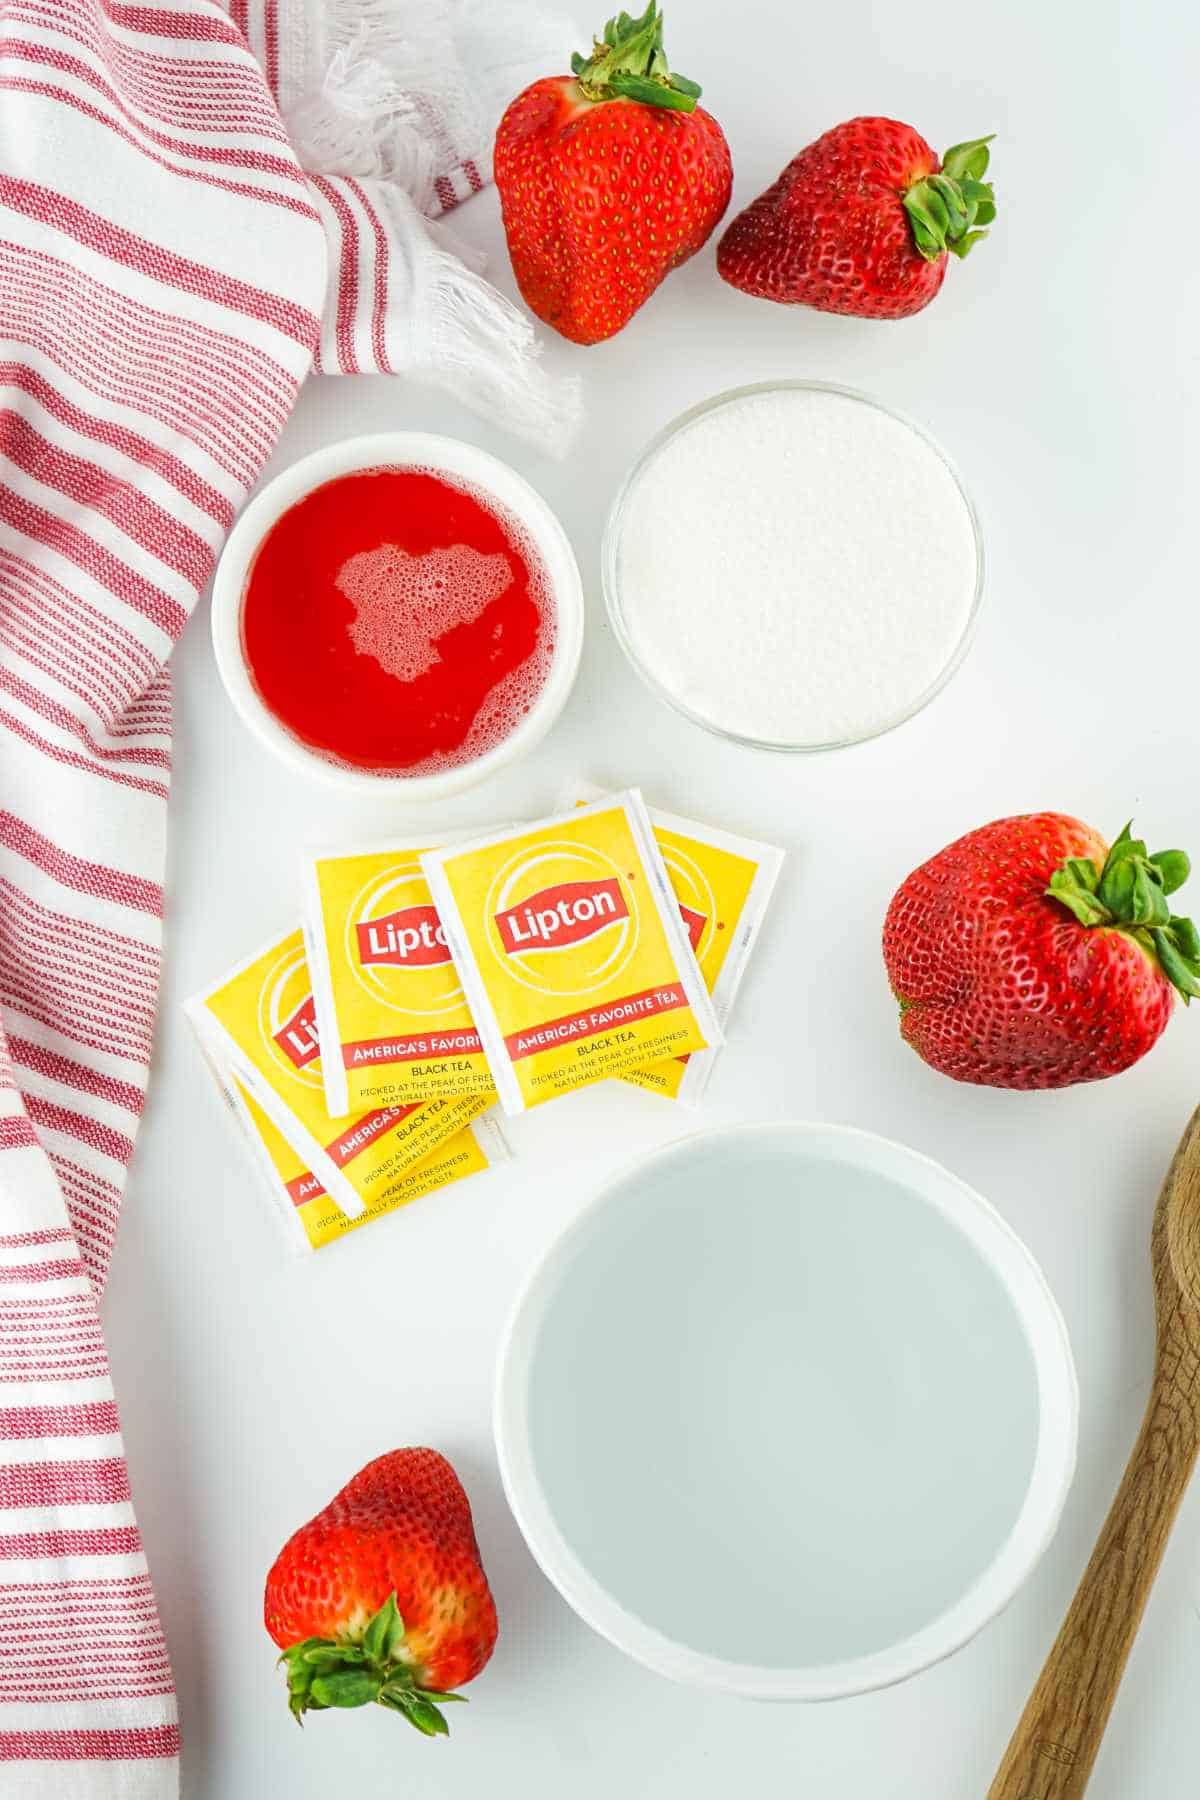 ingredients for making iced tea with strawberry.